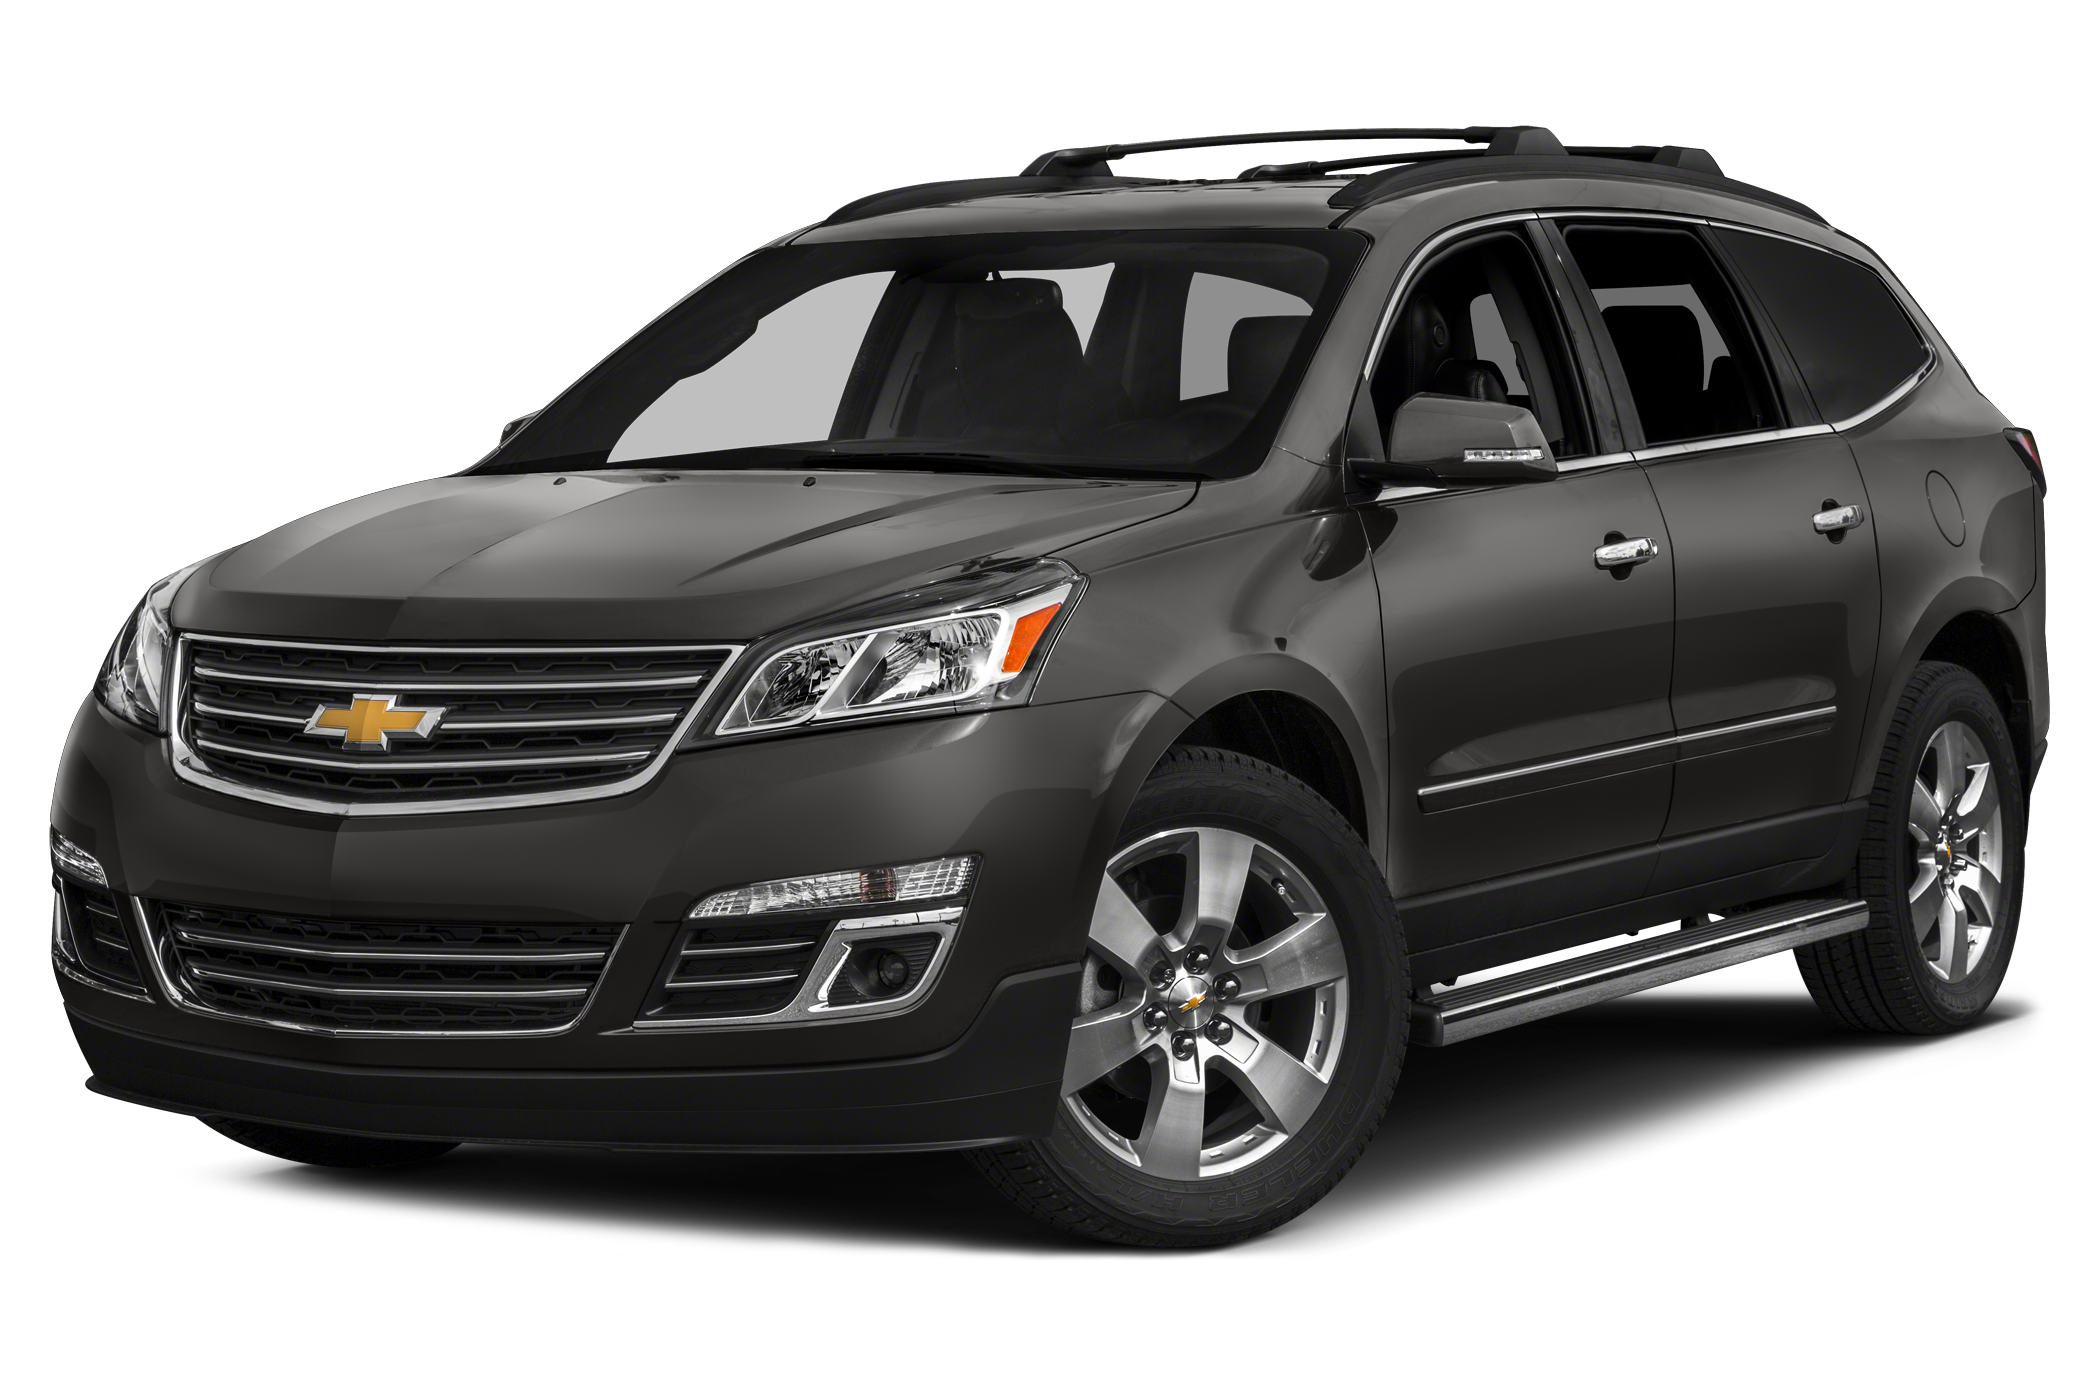 Used 2013 Chevrolet Traverse for Sale Near Me | Cars.com